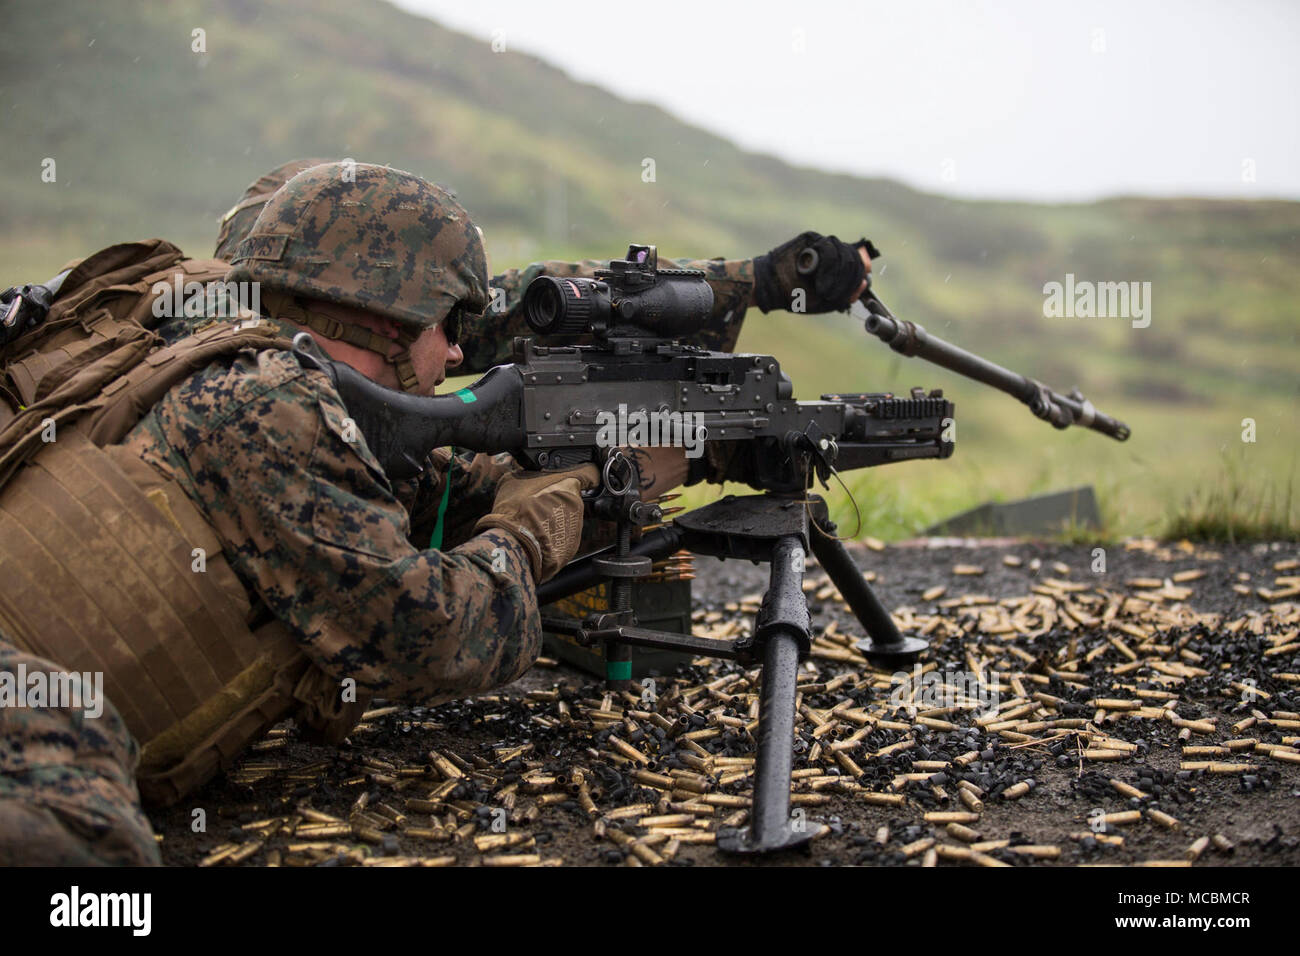 U.S. Marines with Bravo Company (Bravo Co.), 1st Battalion, 3rd Marine Regiment, fire a M240B machine gun during a squad supported exercise at the Kaneohe Bay Range Training Facility, Marine Corps Base Hawaii, Mar. 22, 2018. Bravo Co. utilized machine gun suppression and mortar fire on simulated enemy forces, while infantrymen assaulted forward towards them. This combined-forces exercise was the last day of the battalion’s training event, Exercise Bougainville One, an annual training exercise that strengthens pre-deployment readiness. Stock Photo